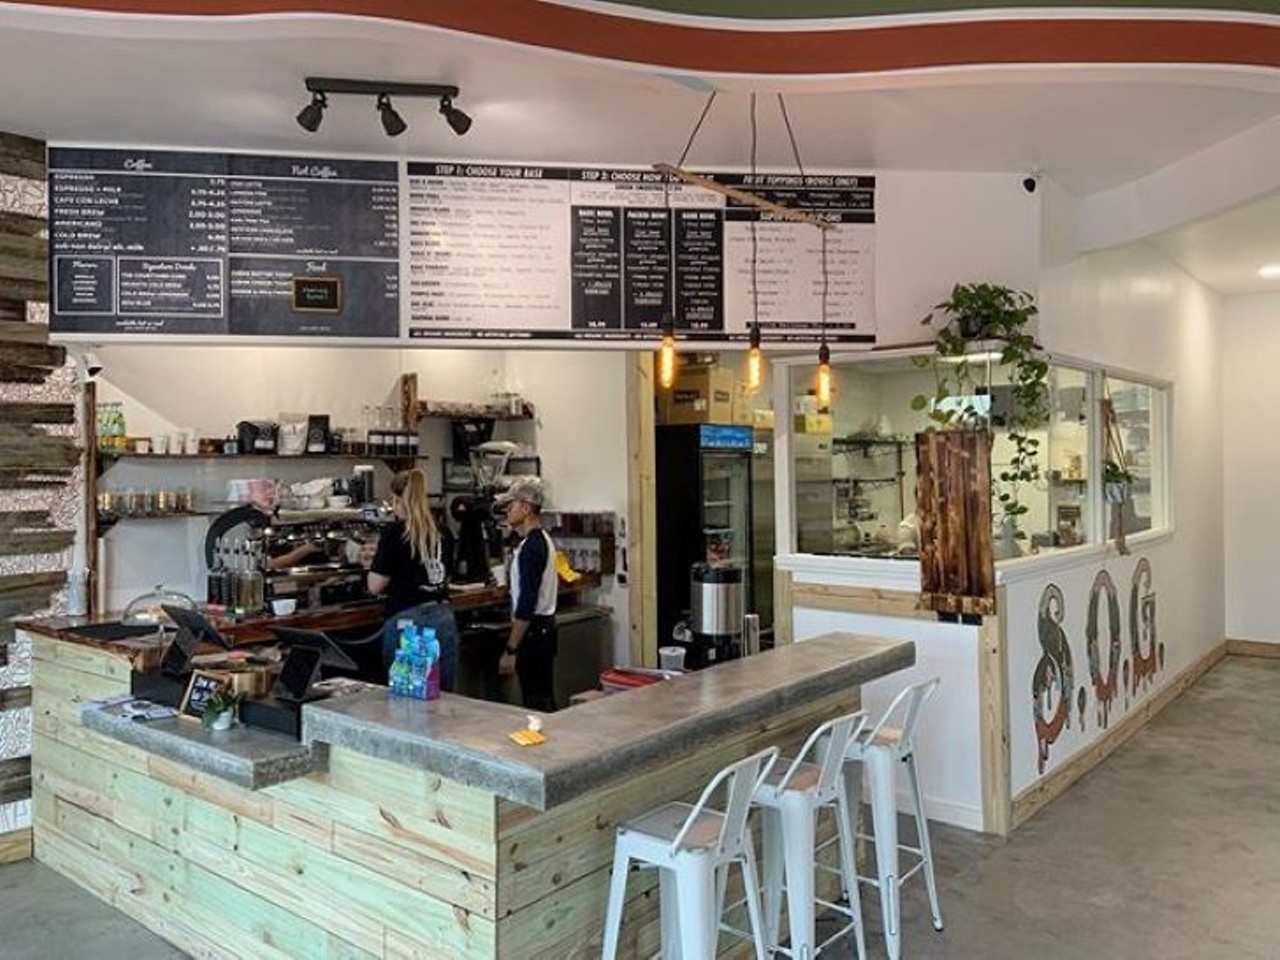 Spaddy&#146;s Coffee Co.  
6102 S. MacDill Ave., South Tampa
Spaddy&#146;s teamed up with Raw Smoothies Co. to open a second location in Tampa. Instead of visiting the trailer location in Seminole Heights, you can now get your caffeine fix and a smoothie bowl at the coffee shop&#146;s first brick and mortar location. 
Photo via Spaddy&#146;s Coffee/Instagram